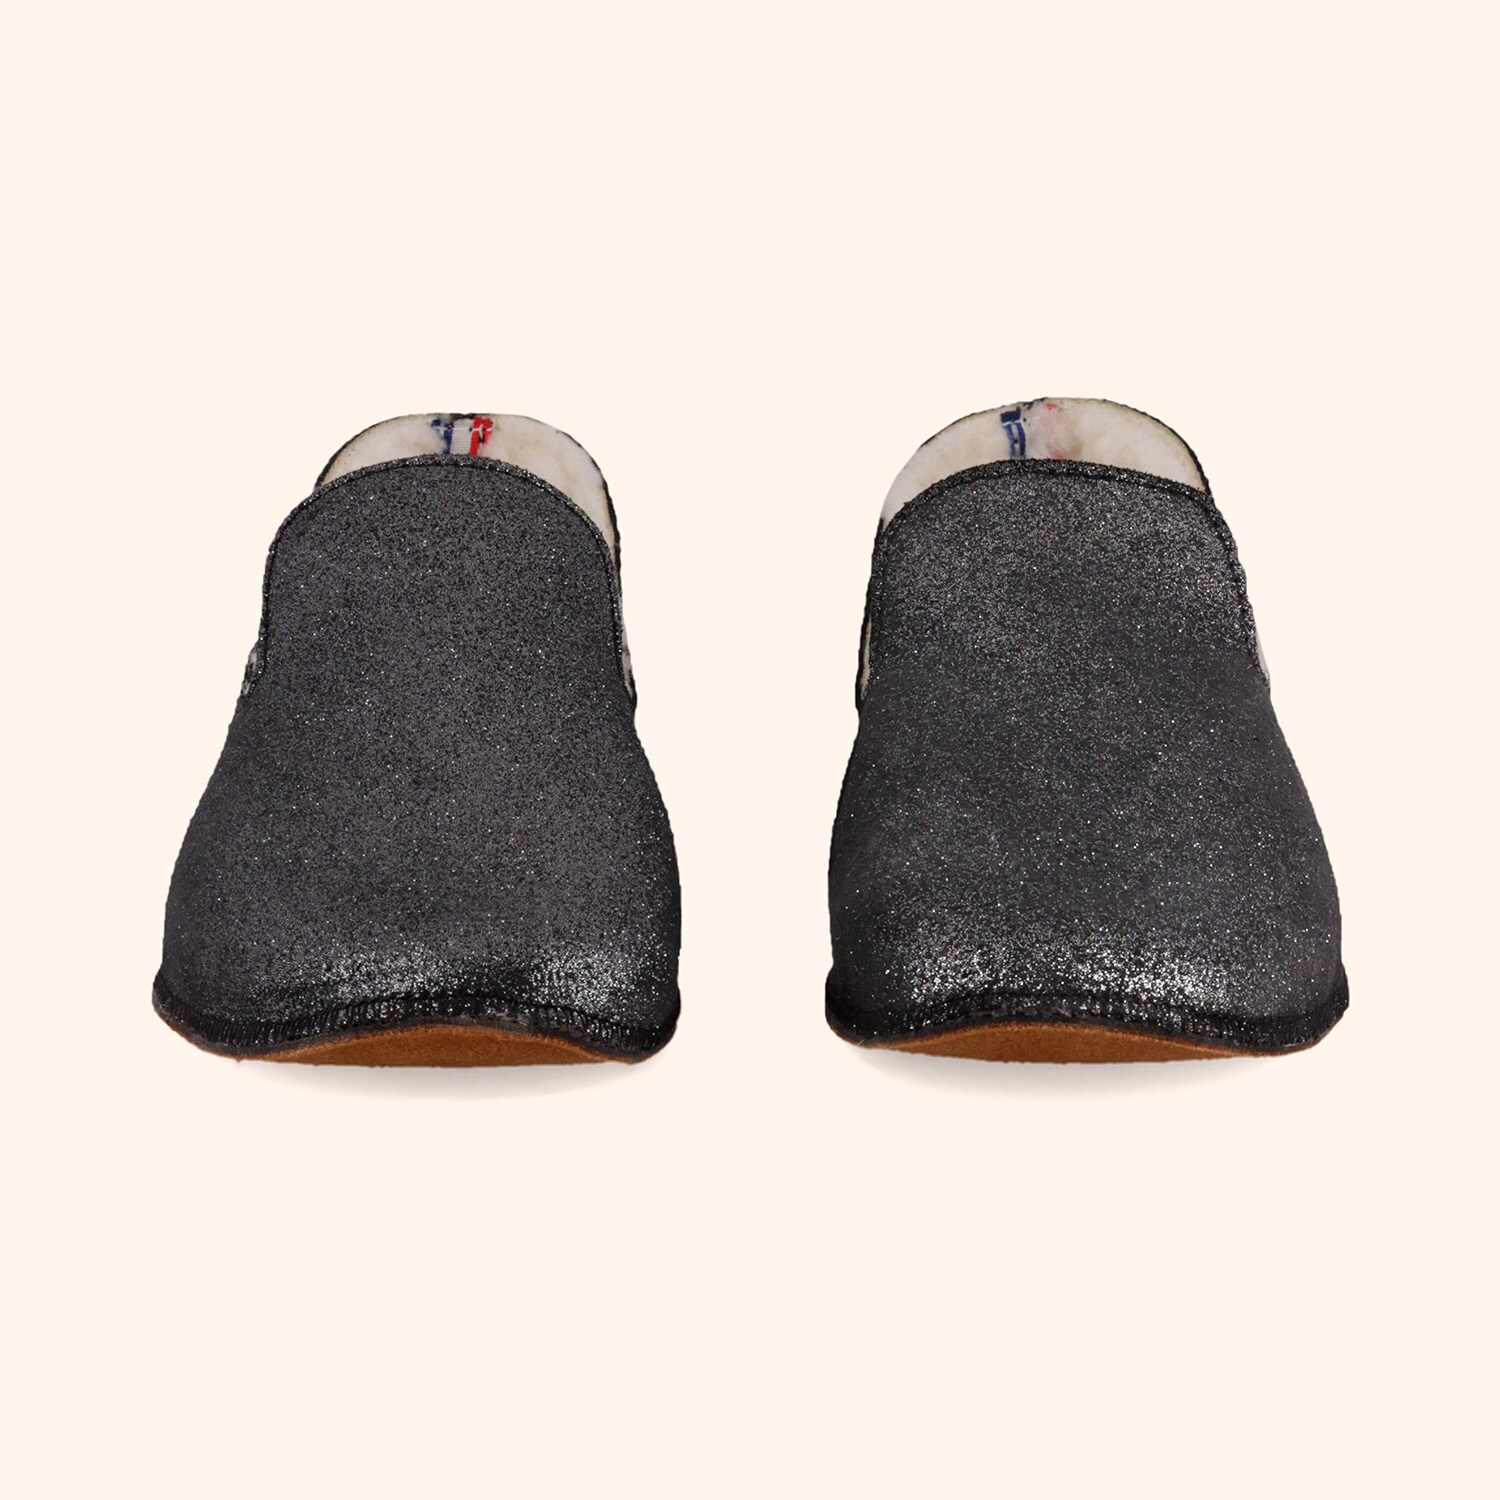 Chaussons Coco Sparkling noirs